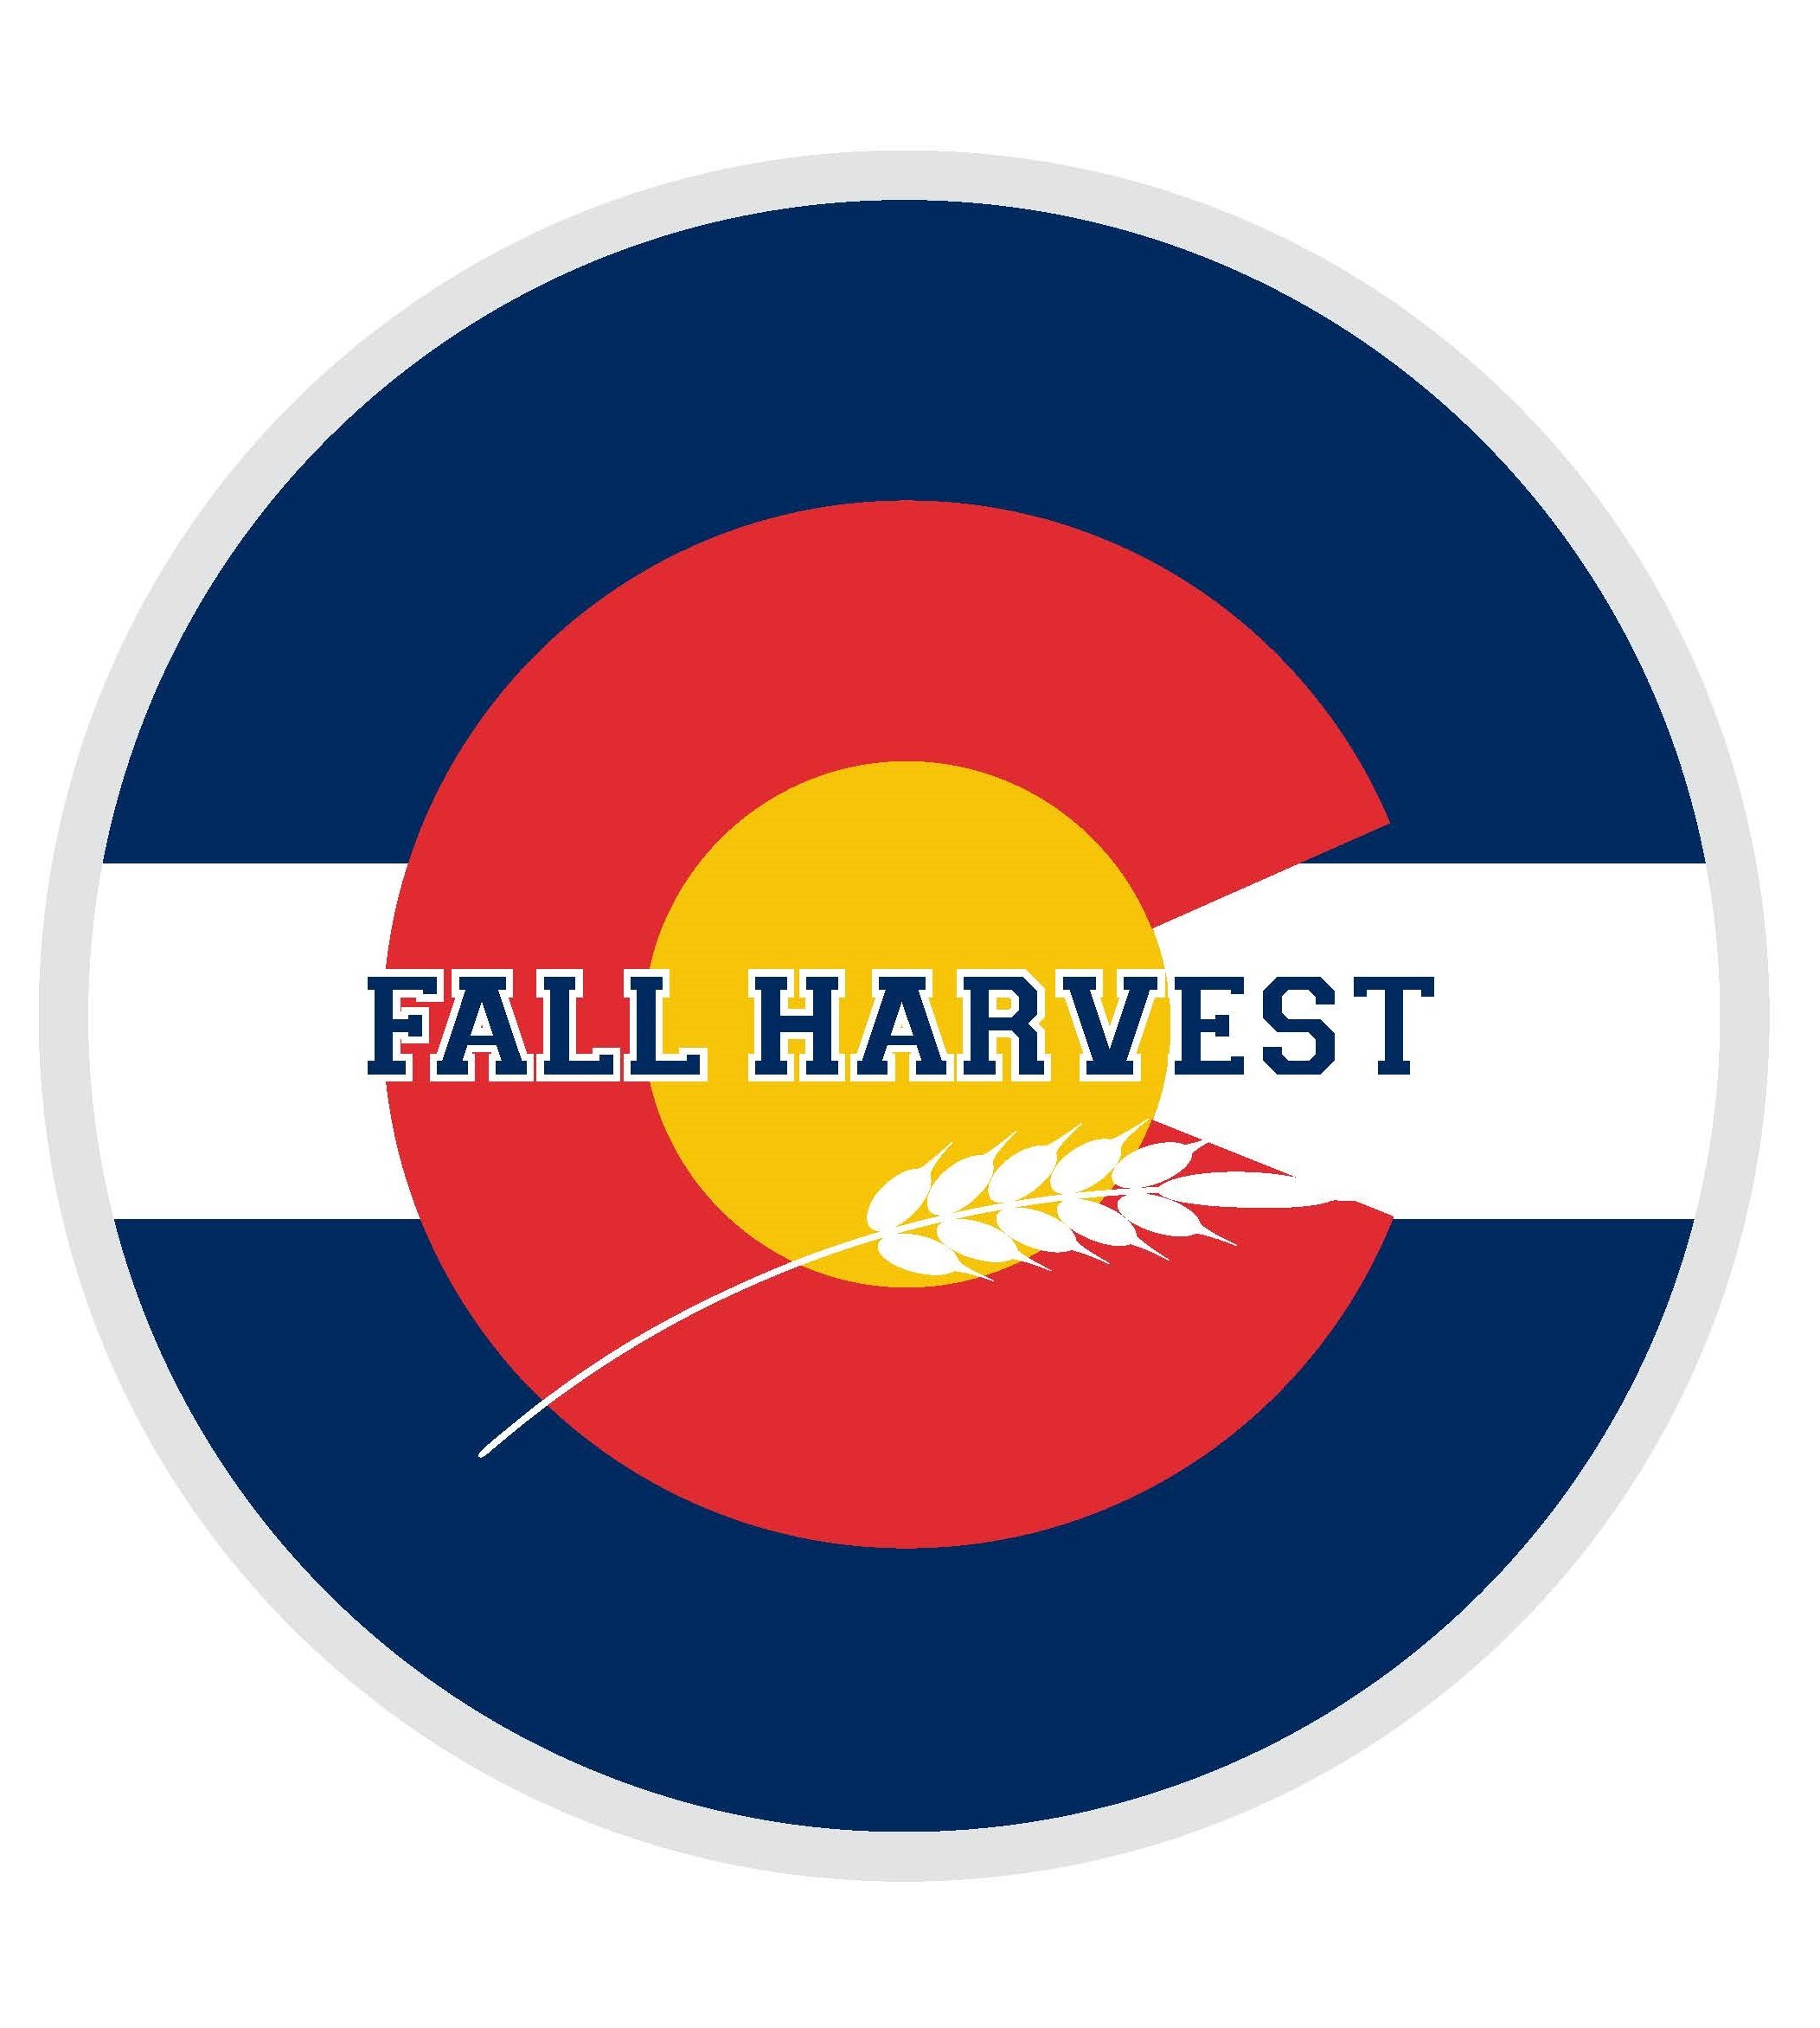 Fall Harvest Tournament - Offering Competitive Lacrosse to Colorado High School Players